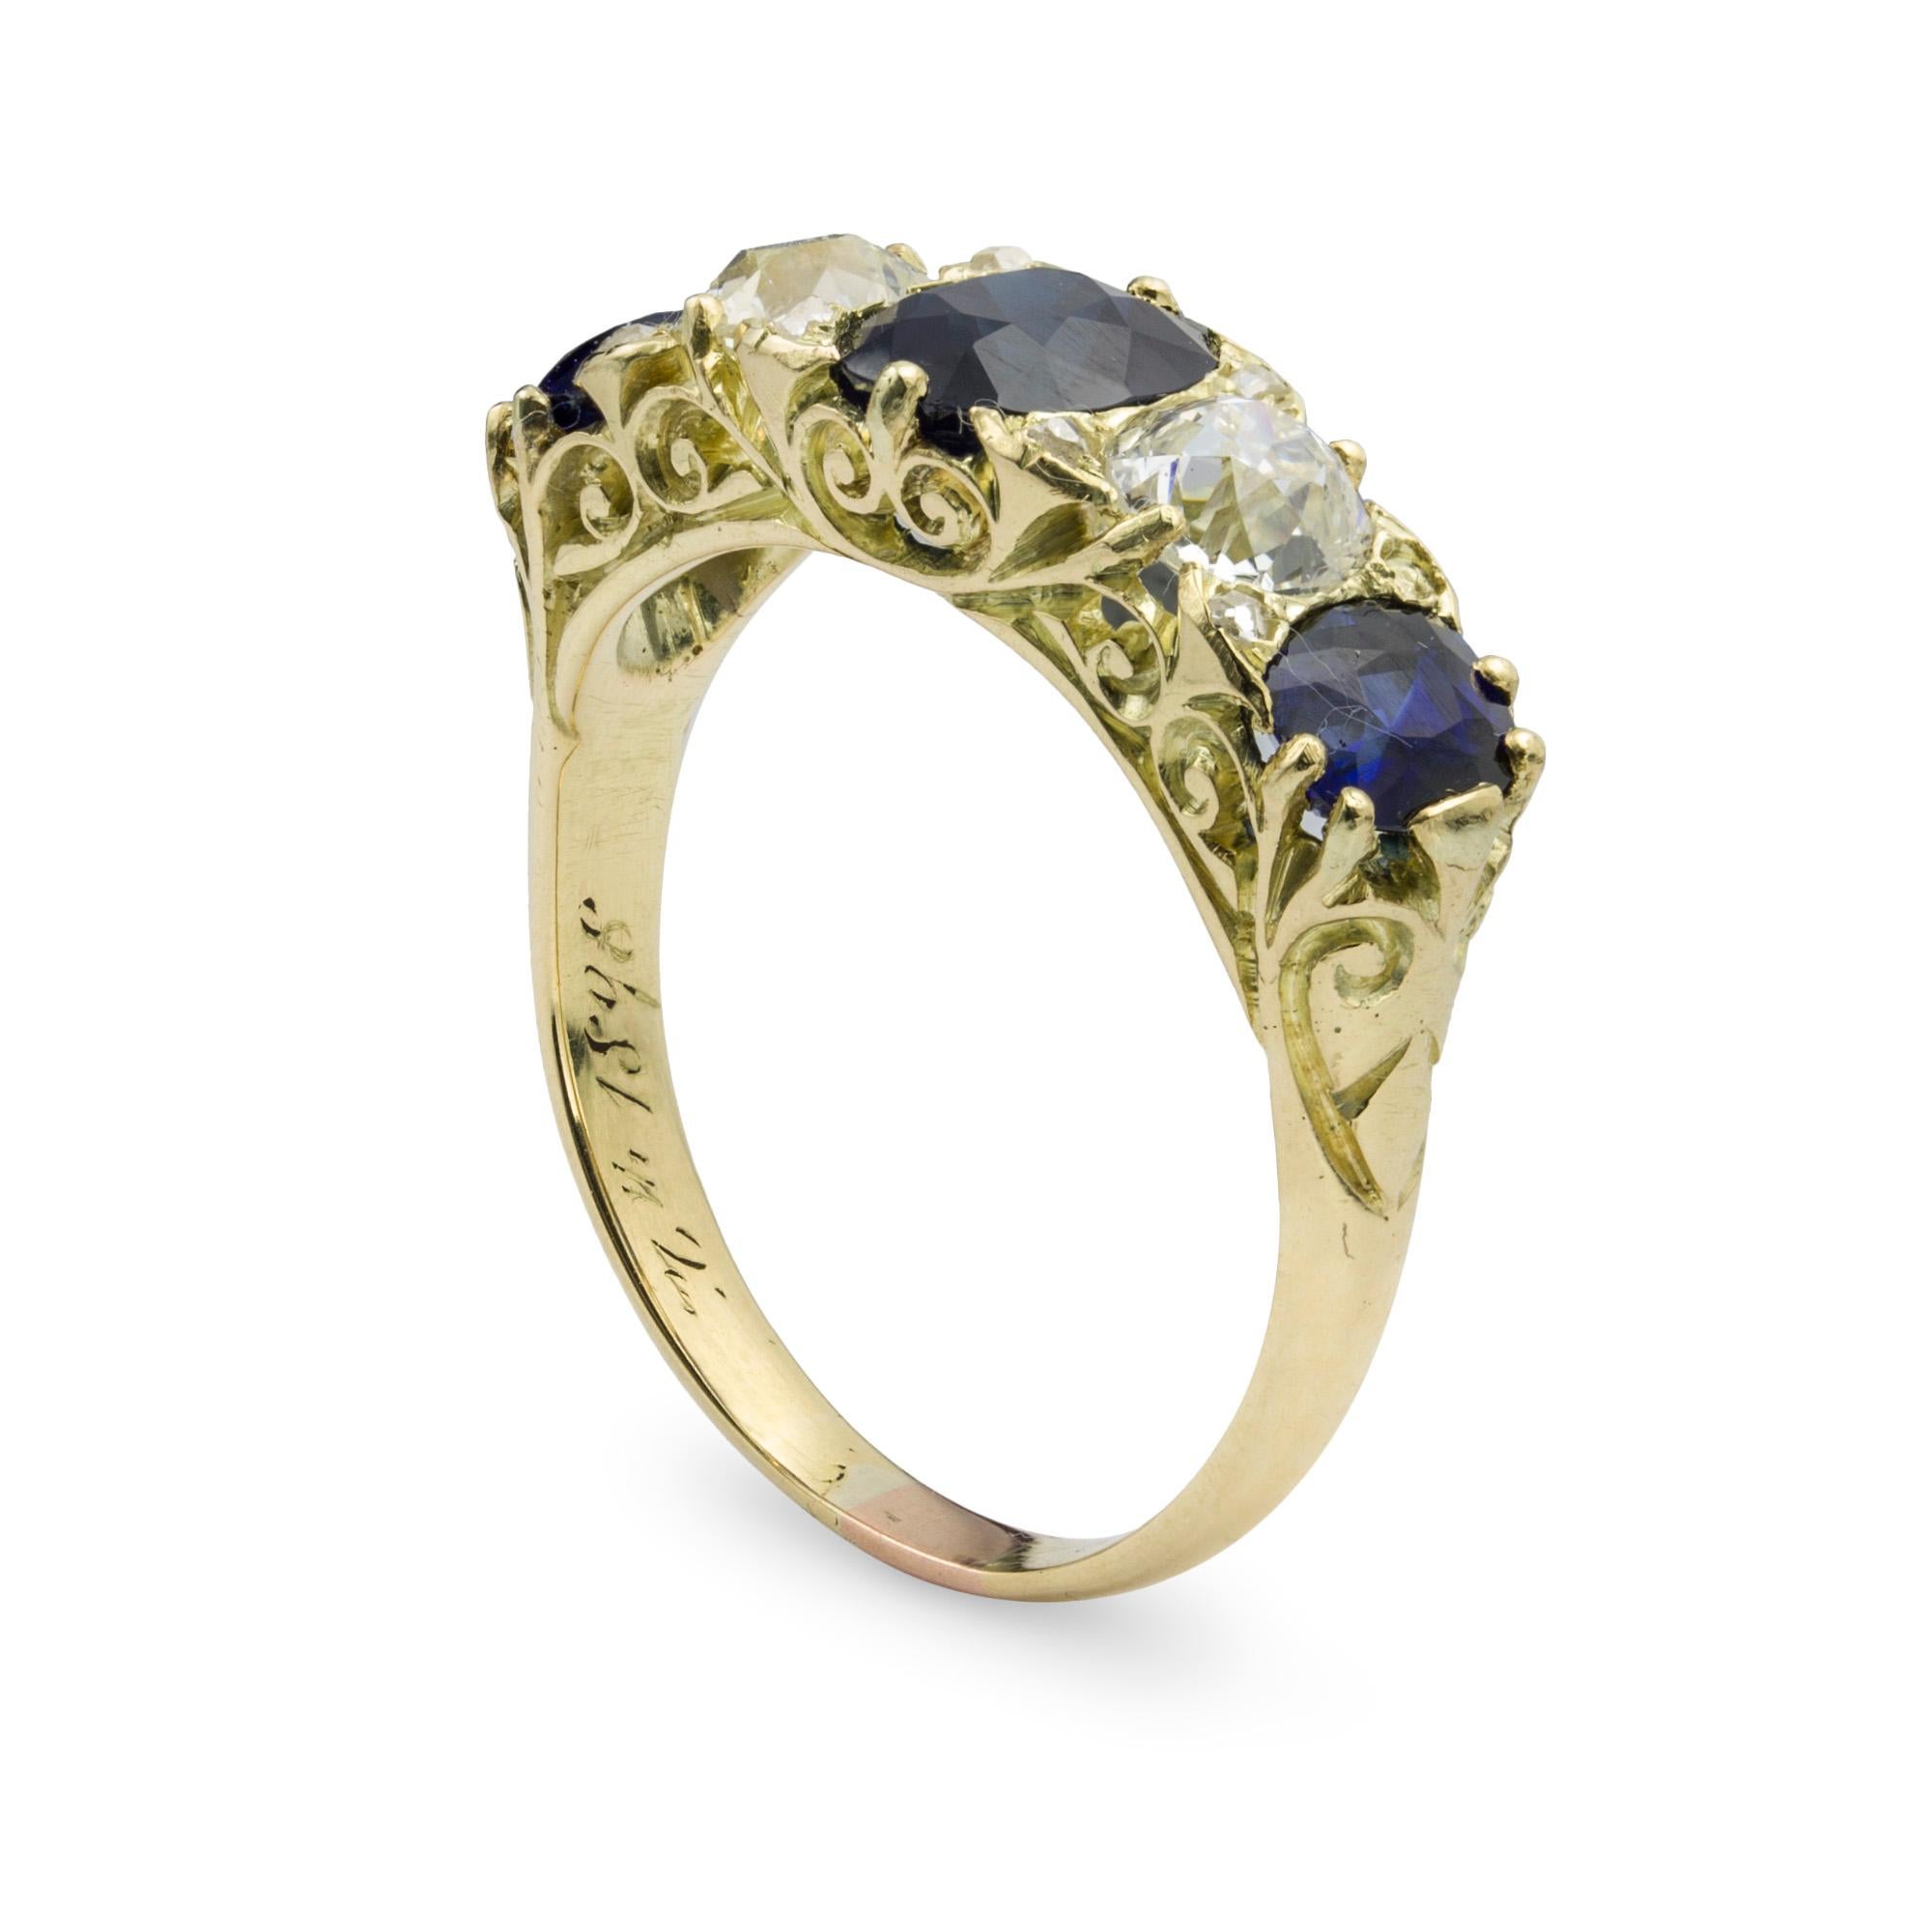 A late Victorian sapphire and diamond five stone ring, set with three cushion-shaped sapphires with total weight 2.58 carats, alternating with two old brilliant-cut diamonds with total weight 1.0 carat, claw set in carved and pierced yellow gold